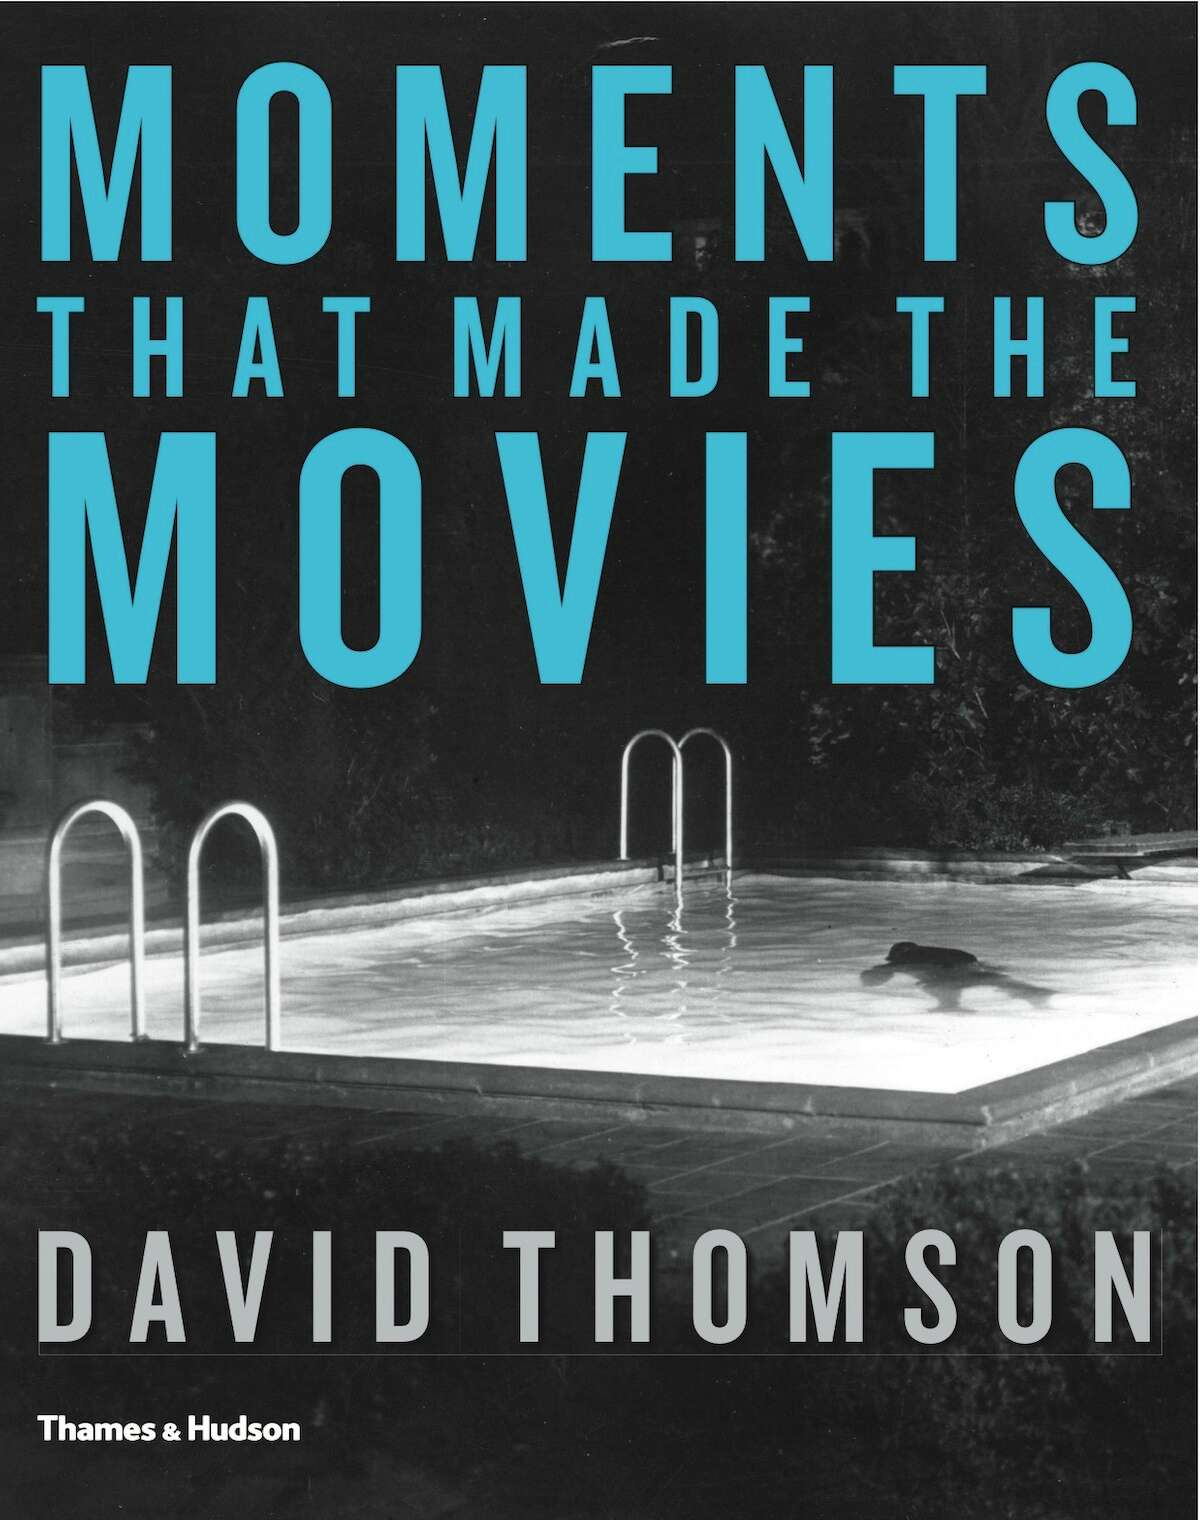 Moments That Made the Movies, by David Thomson